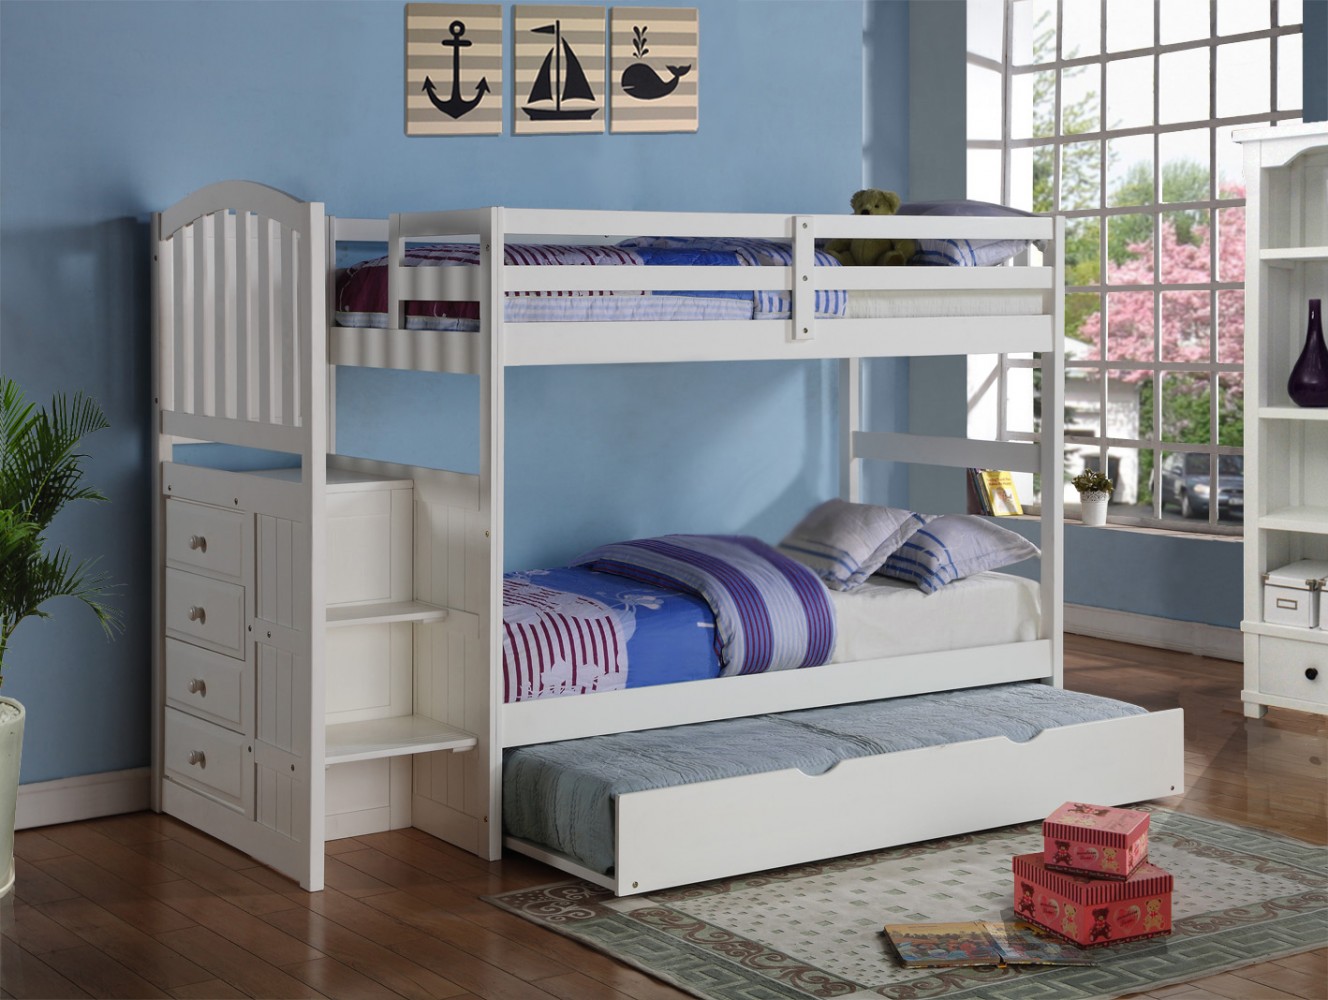 Bunkbeds Donco Trading Co, Donco Bunk Bed With Trundle